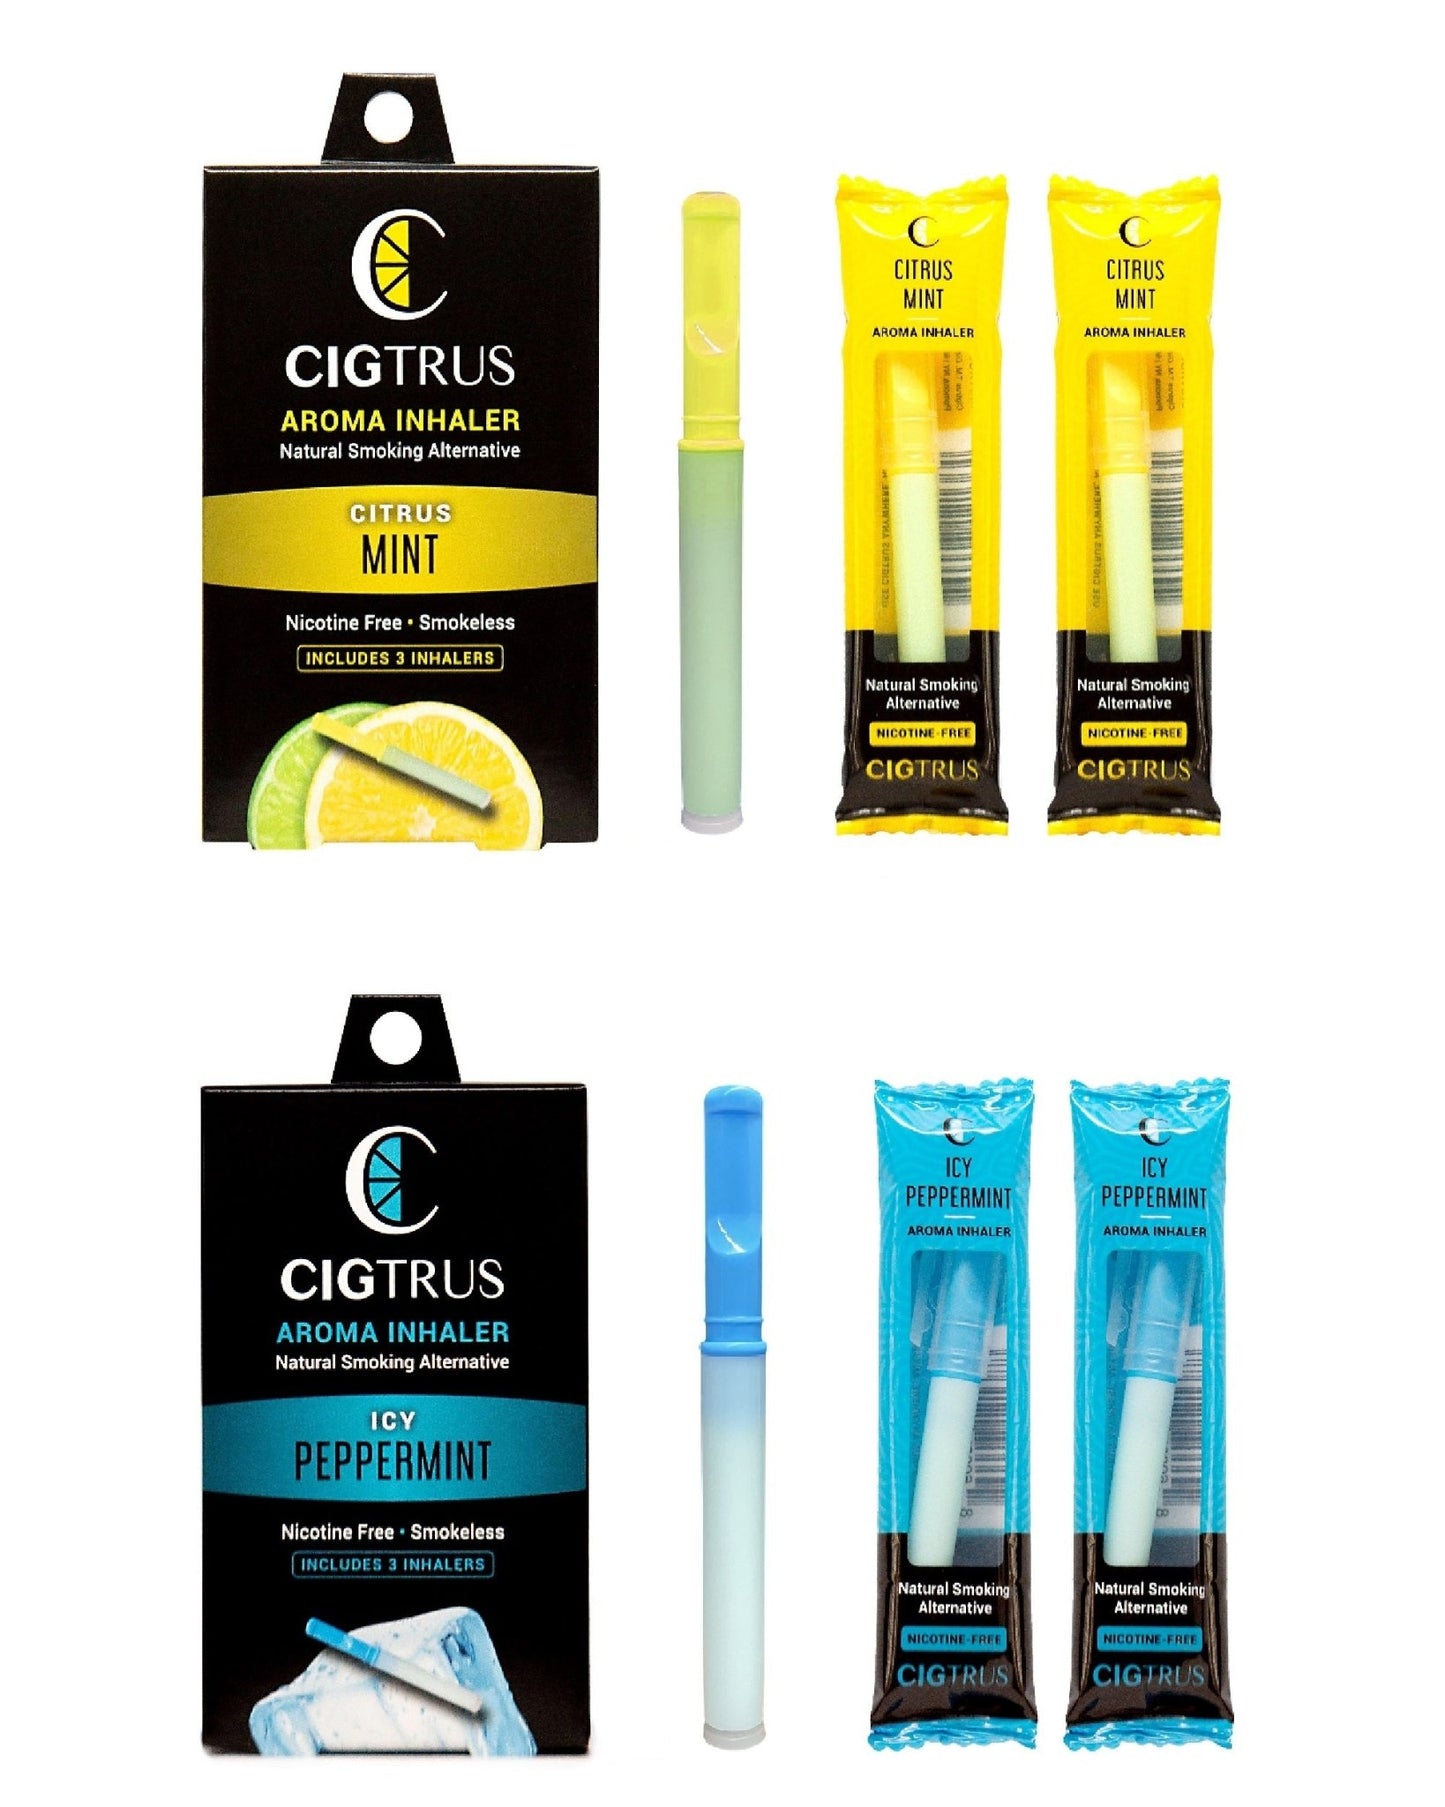 Cigtrus Quit Smoking Behavioral Support Nicotine-Free Oxygen Inhaler Natural Remedy - The Throat Hit Collection Citrus Lime & Icy Peppermint 3 Pack Each - cigtrus.comcigtrus.com